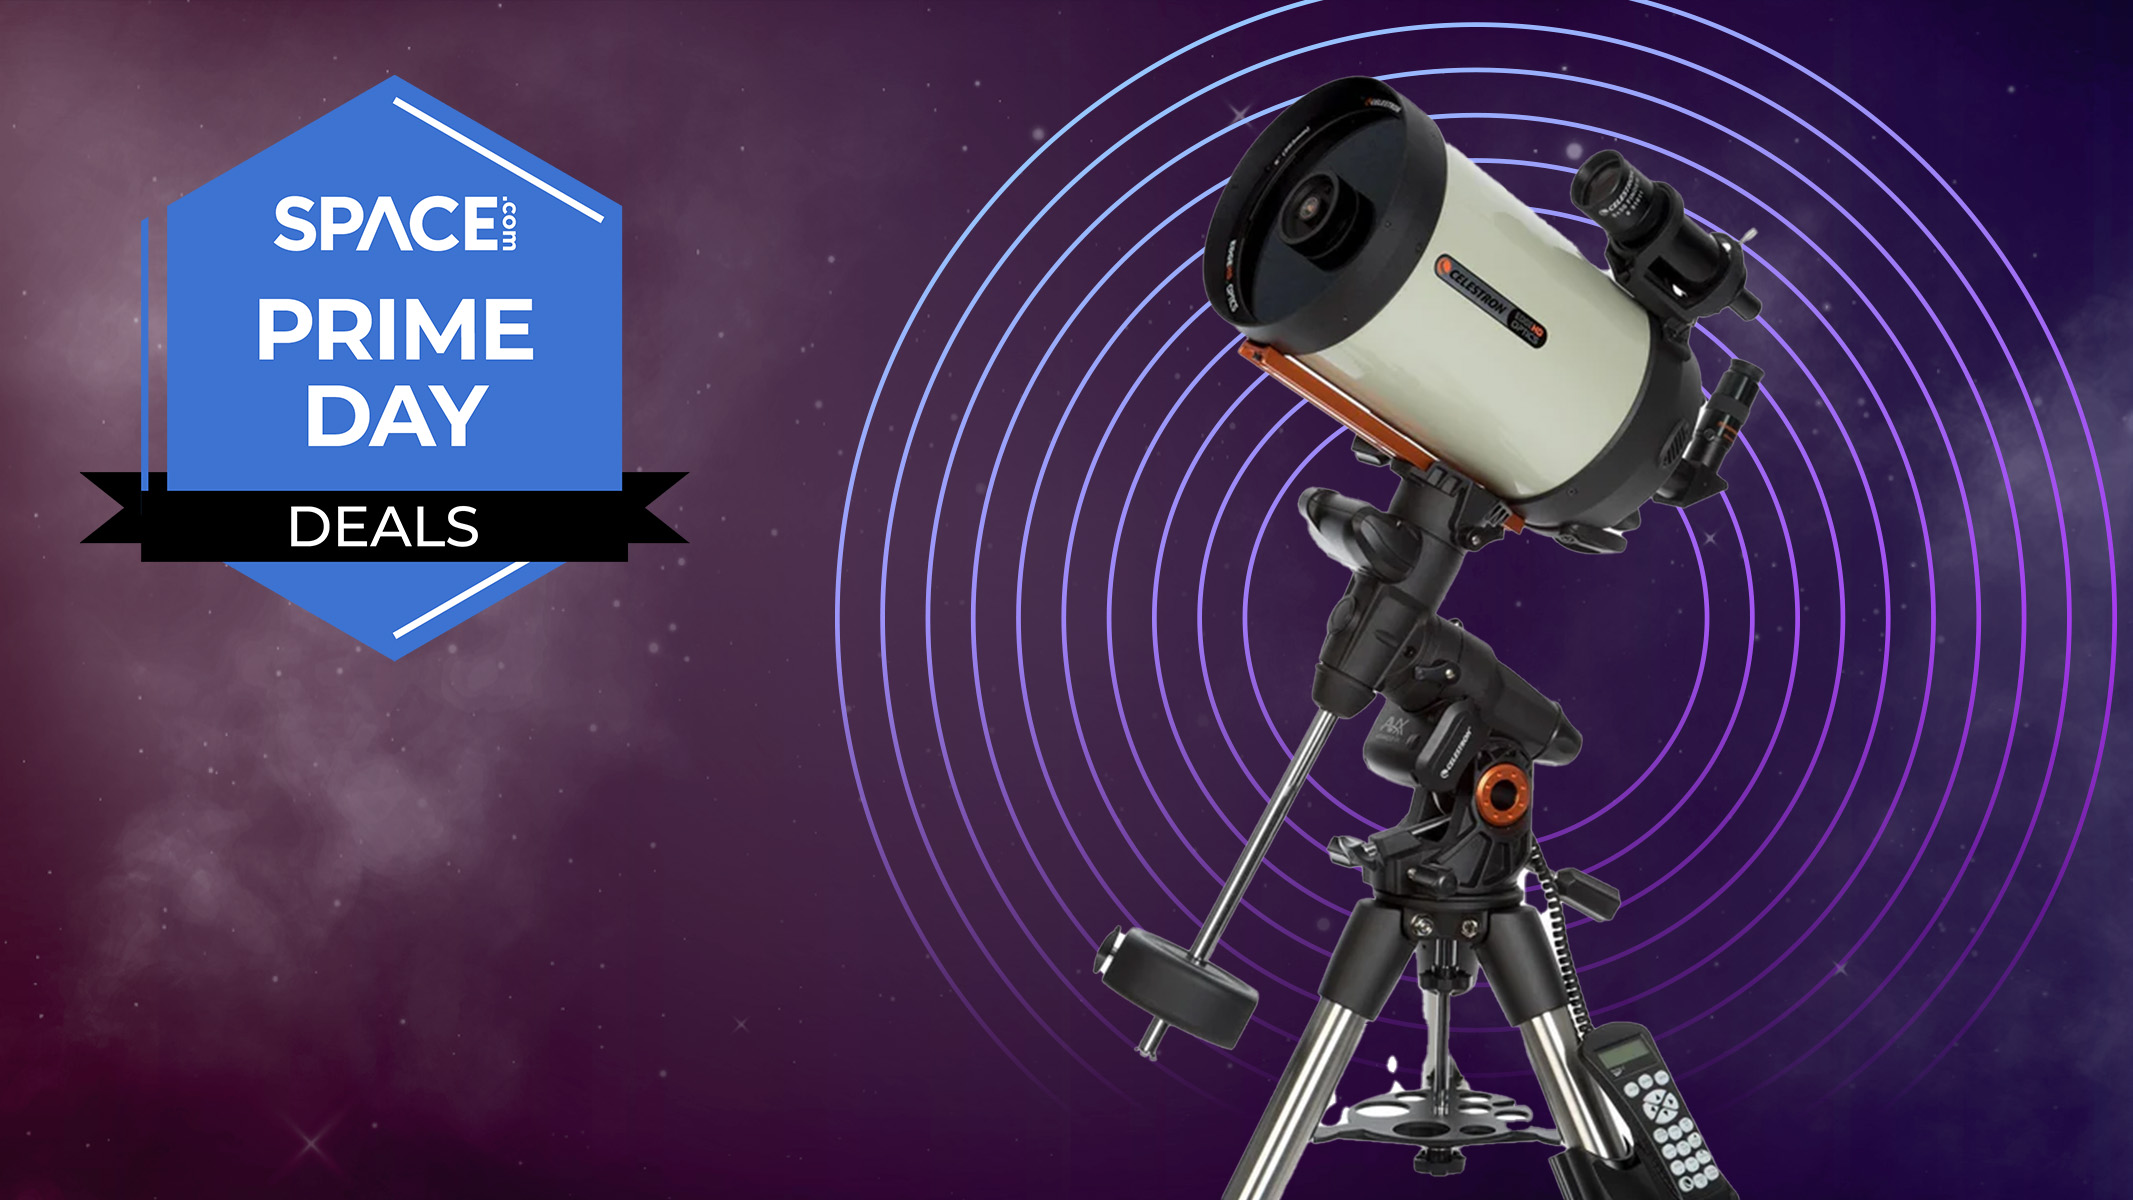  Discover the heavens for less: Save $450 on this five-star telescope at Adorama 